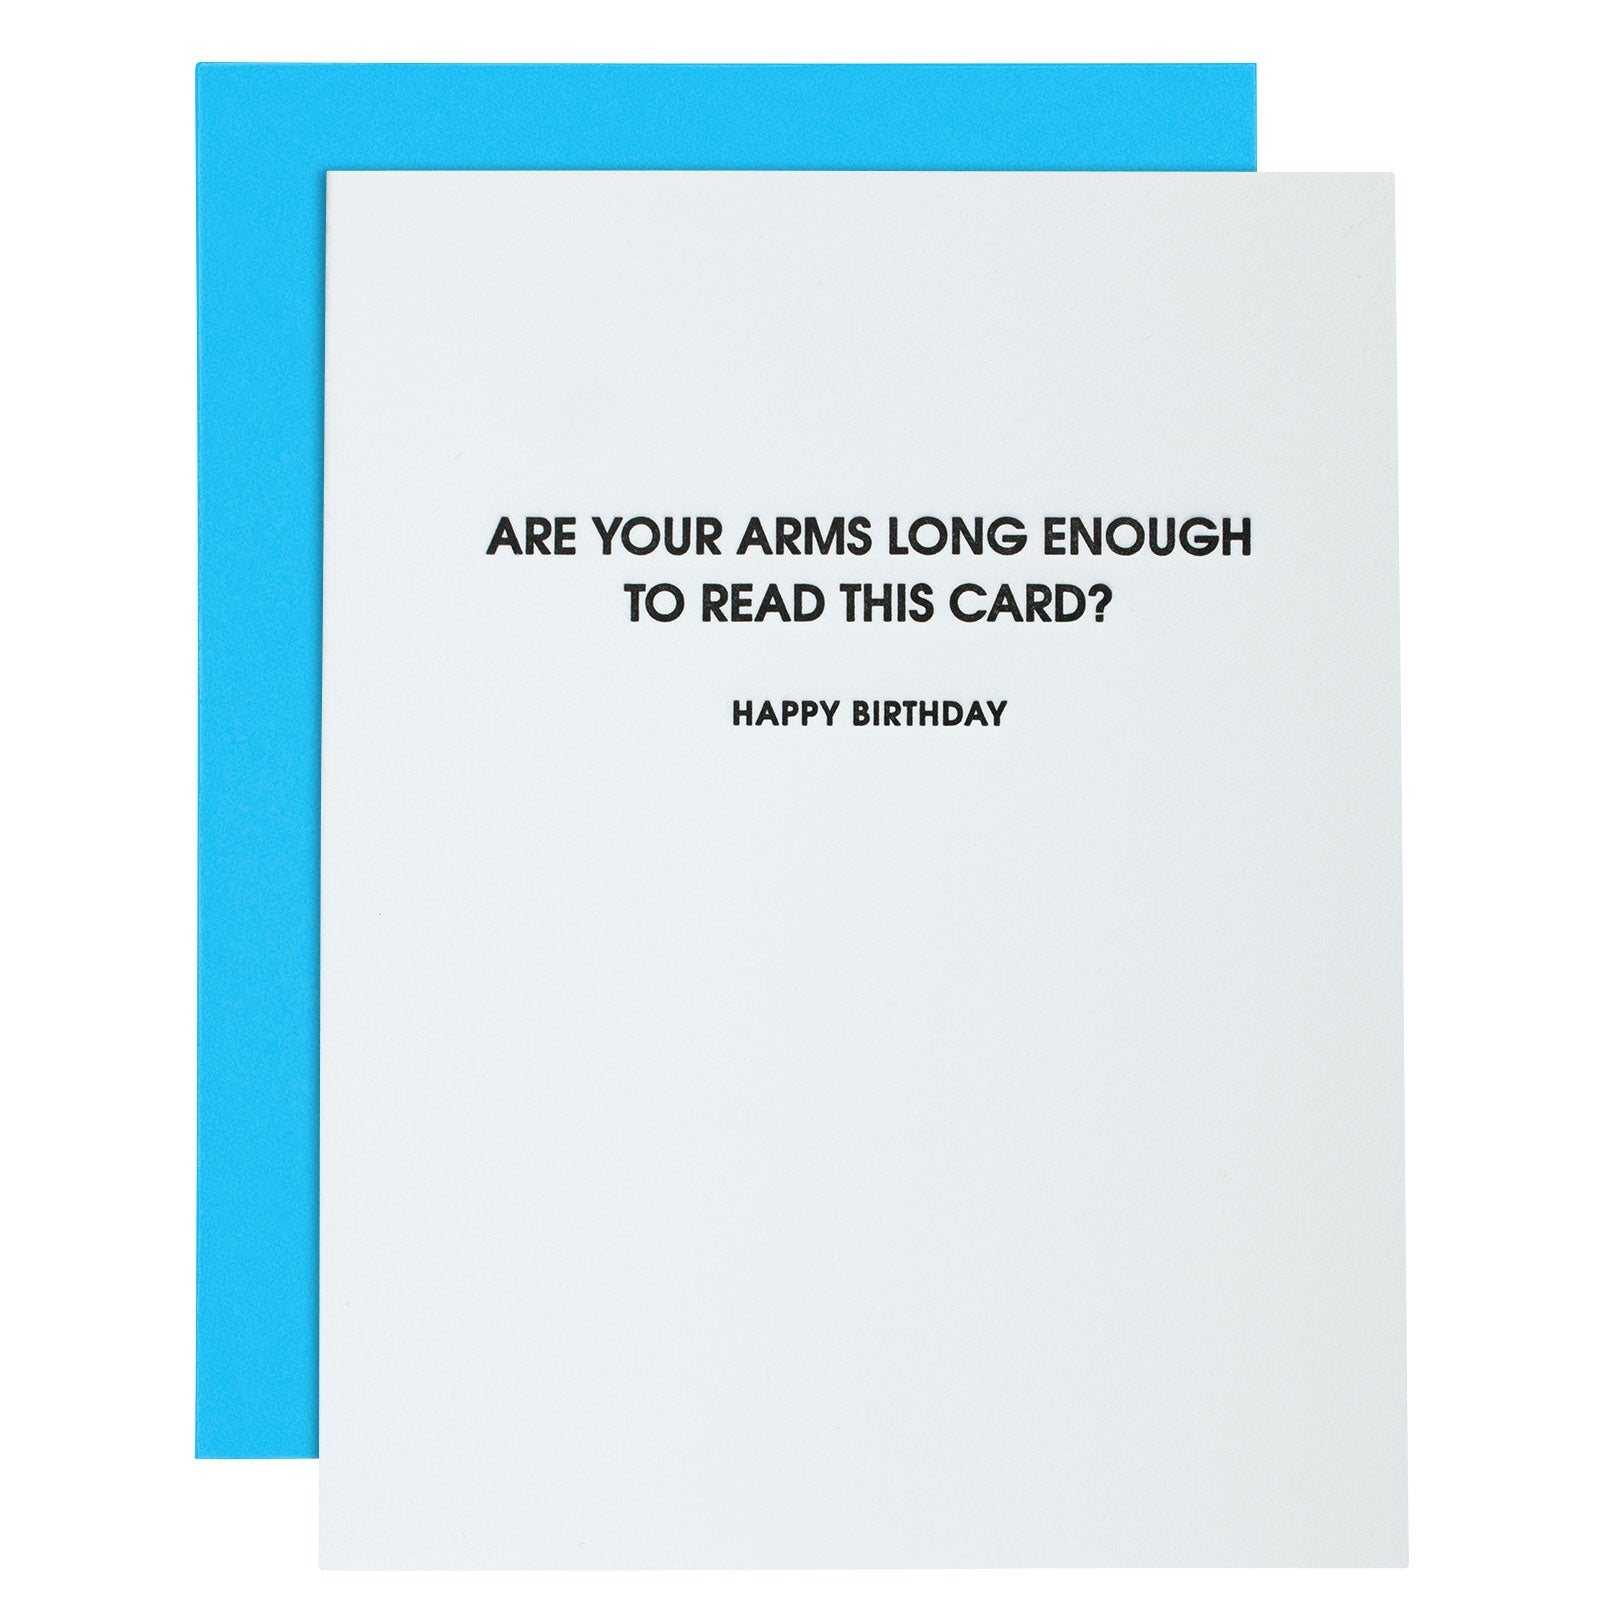 Are Your Arms Long Enough to Read This Card Letterpress Card